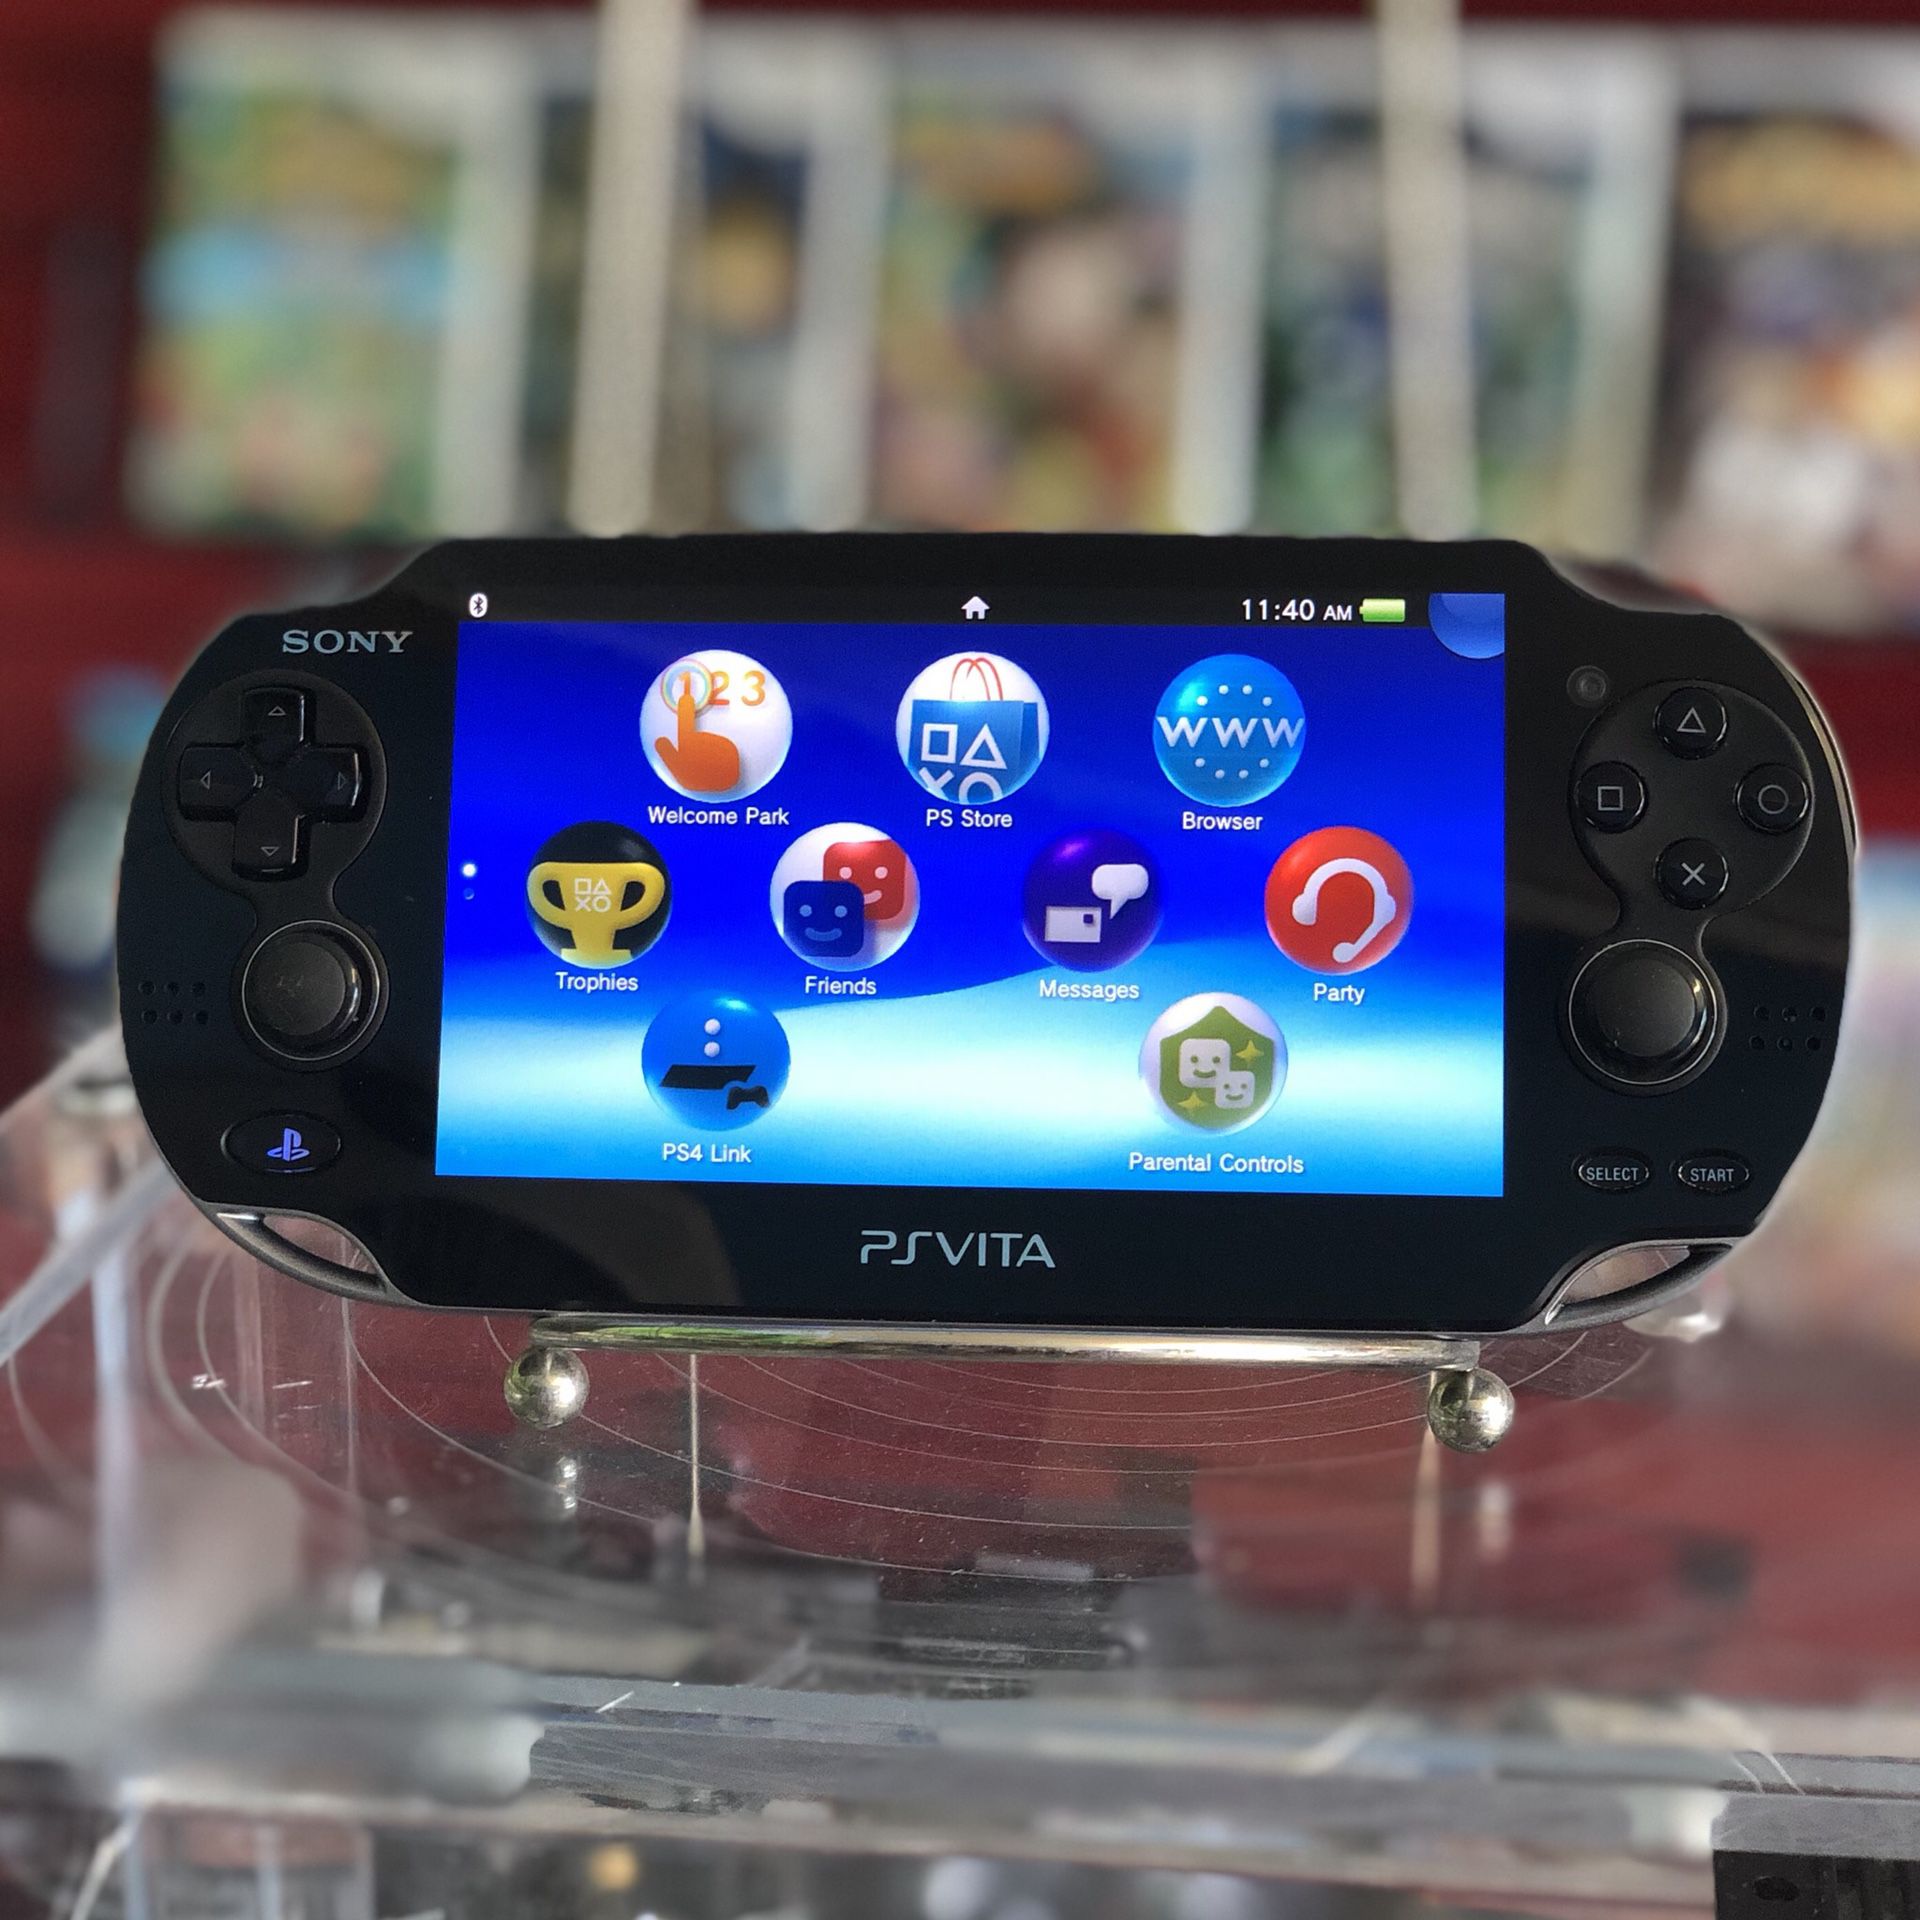 PS Vita in excellent condition with 4GB memory card